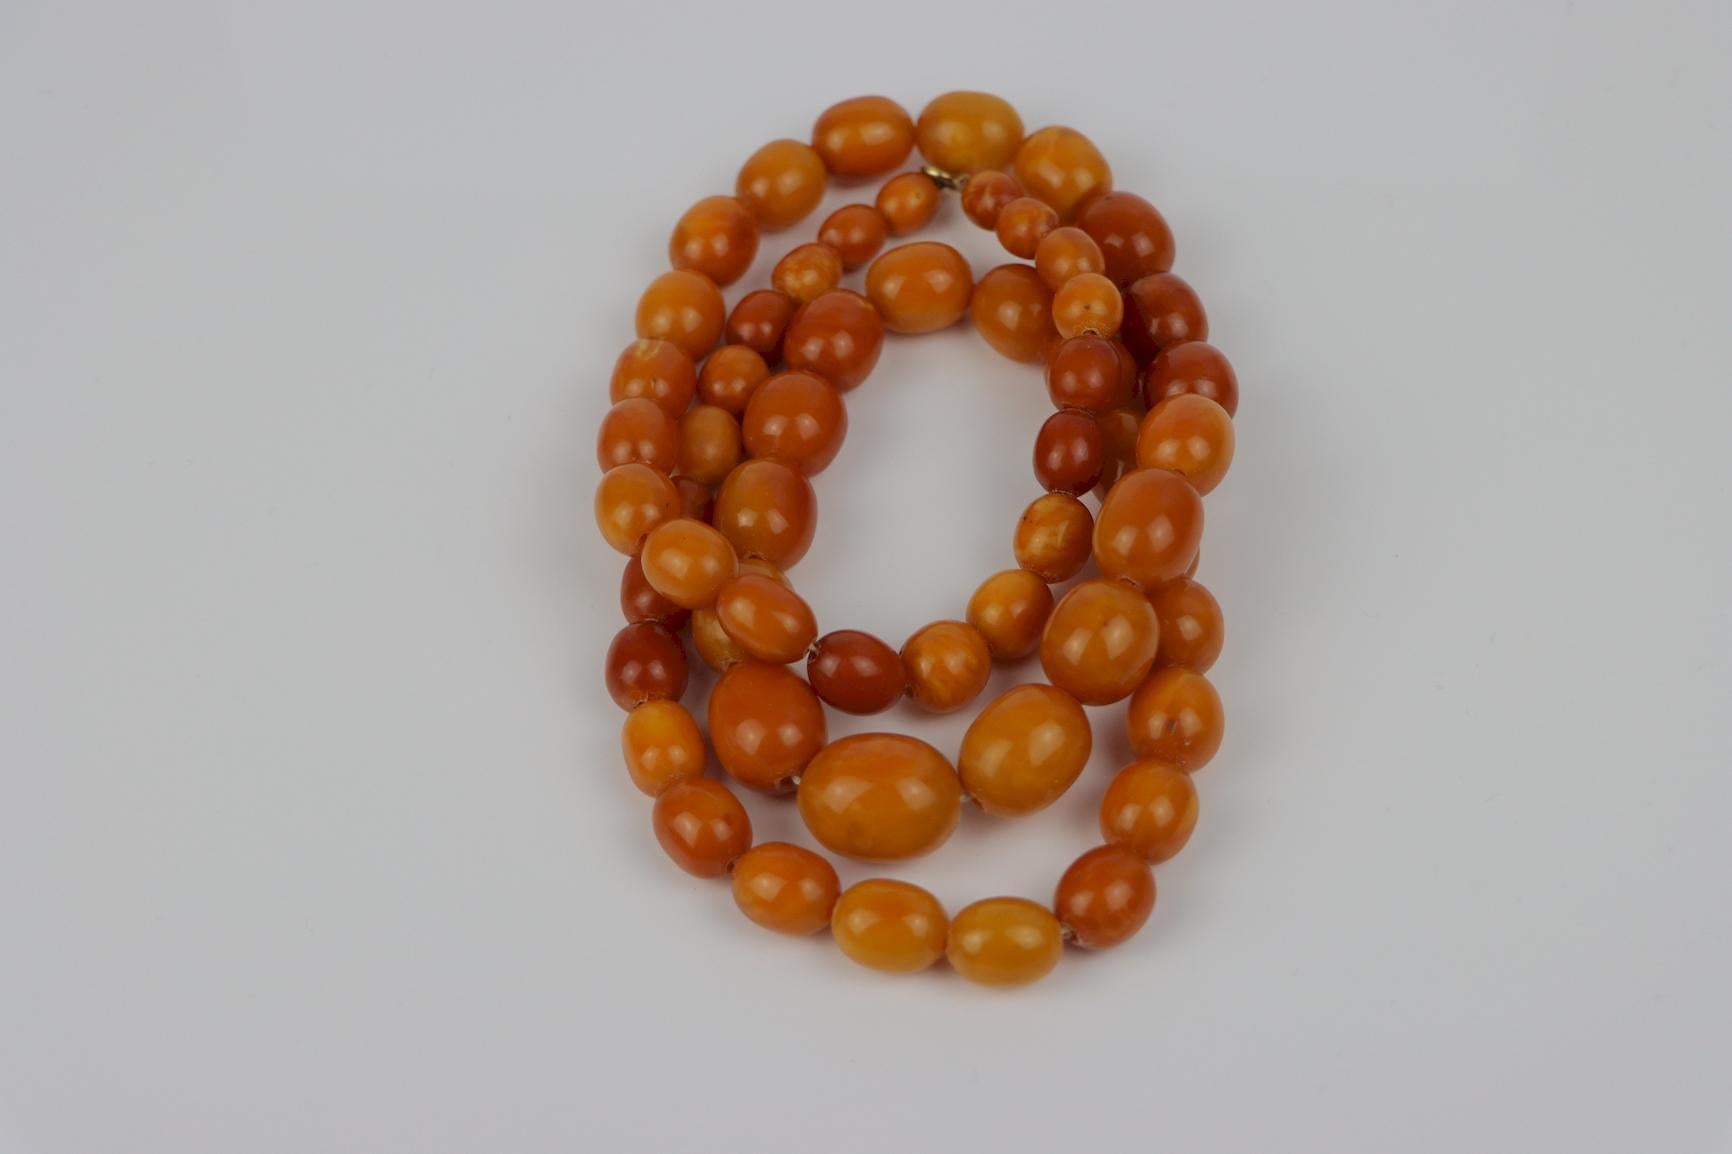 Antique 14K Gold Beeswax Amber Bead Necklace
 
Antique Strand of Graduating Beeswax Amber beads with a 14K Gold clasp.
Circa:
1920

Approximate Dimensions:
41.28 cm (Clasped/Doubled Length) x 83.8 cm (Unclasped Length)
21.25 x 17.10 mm 
10.7 x 8.88